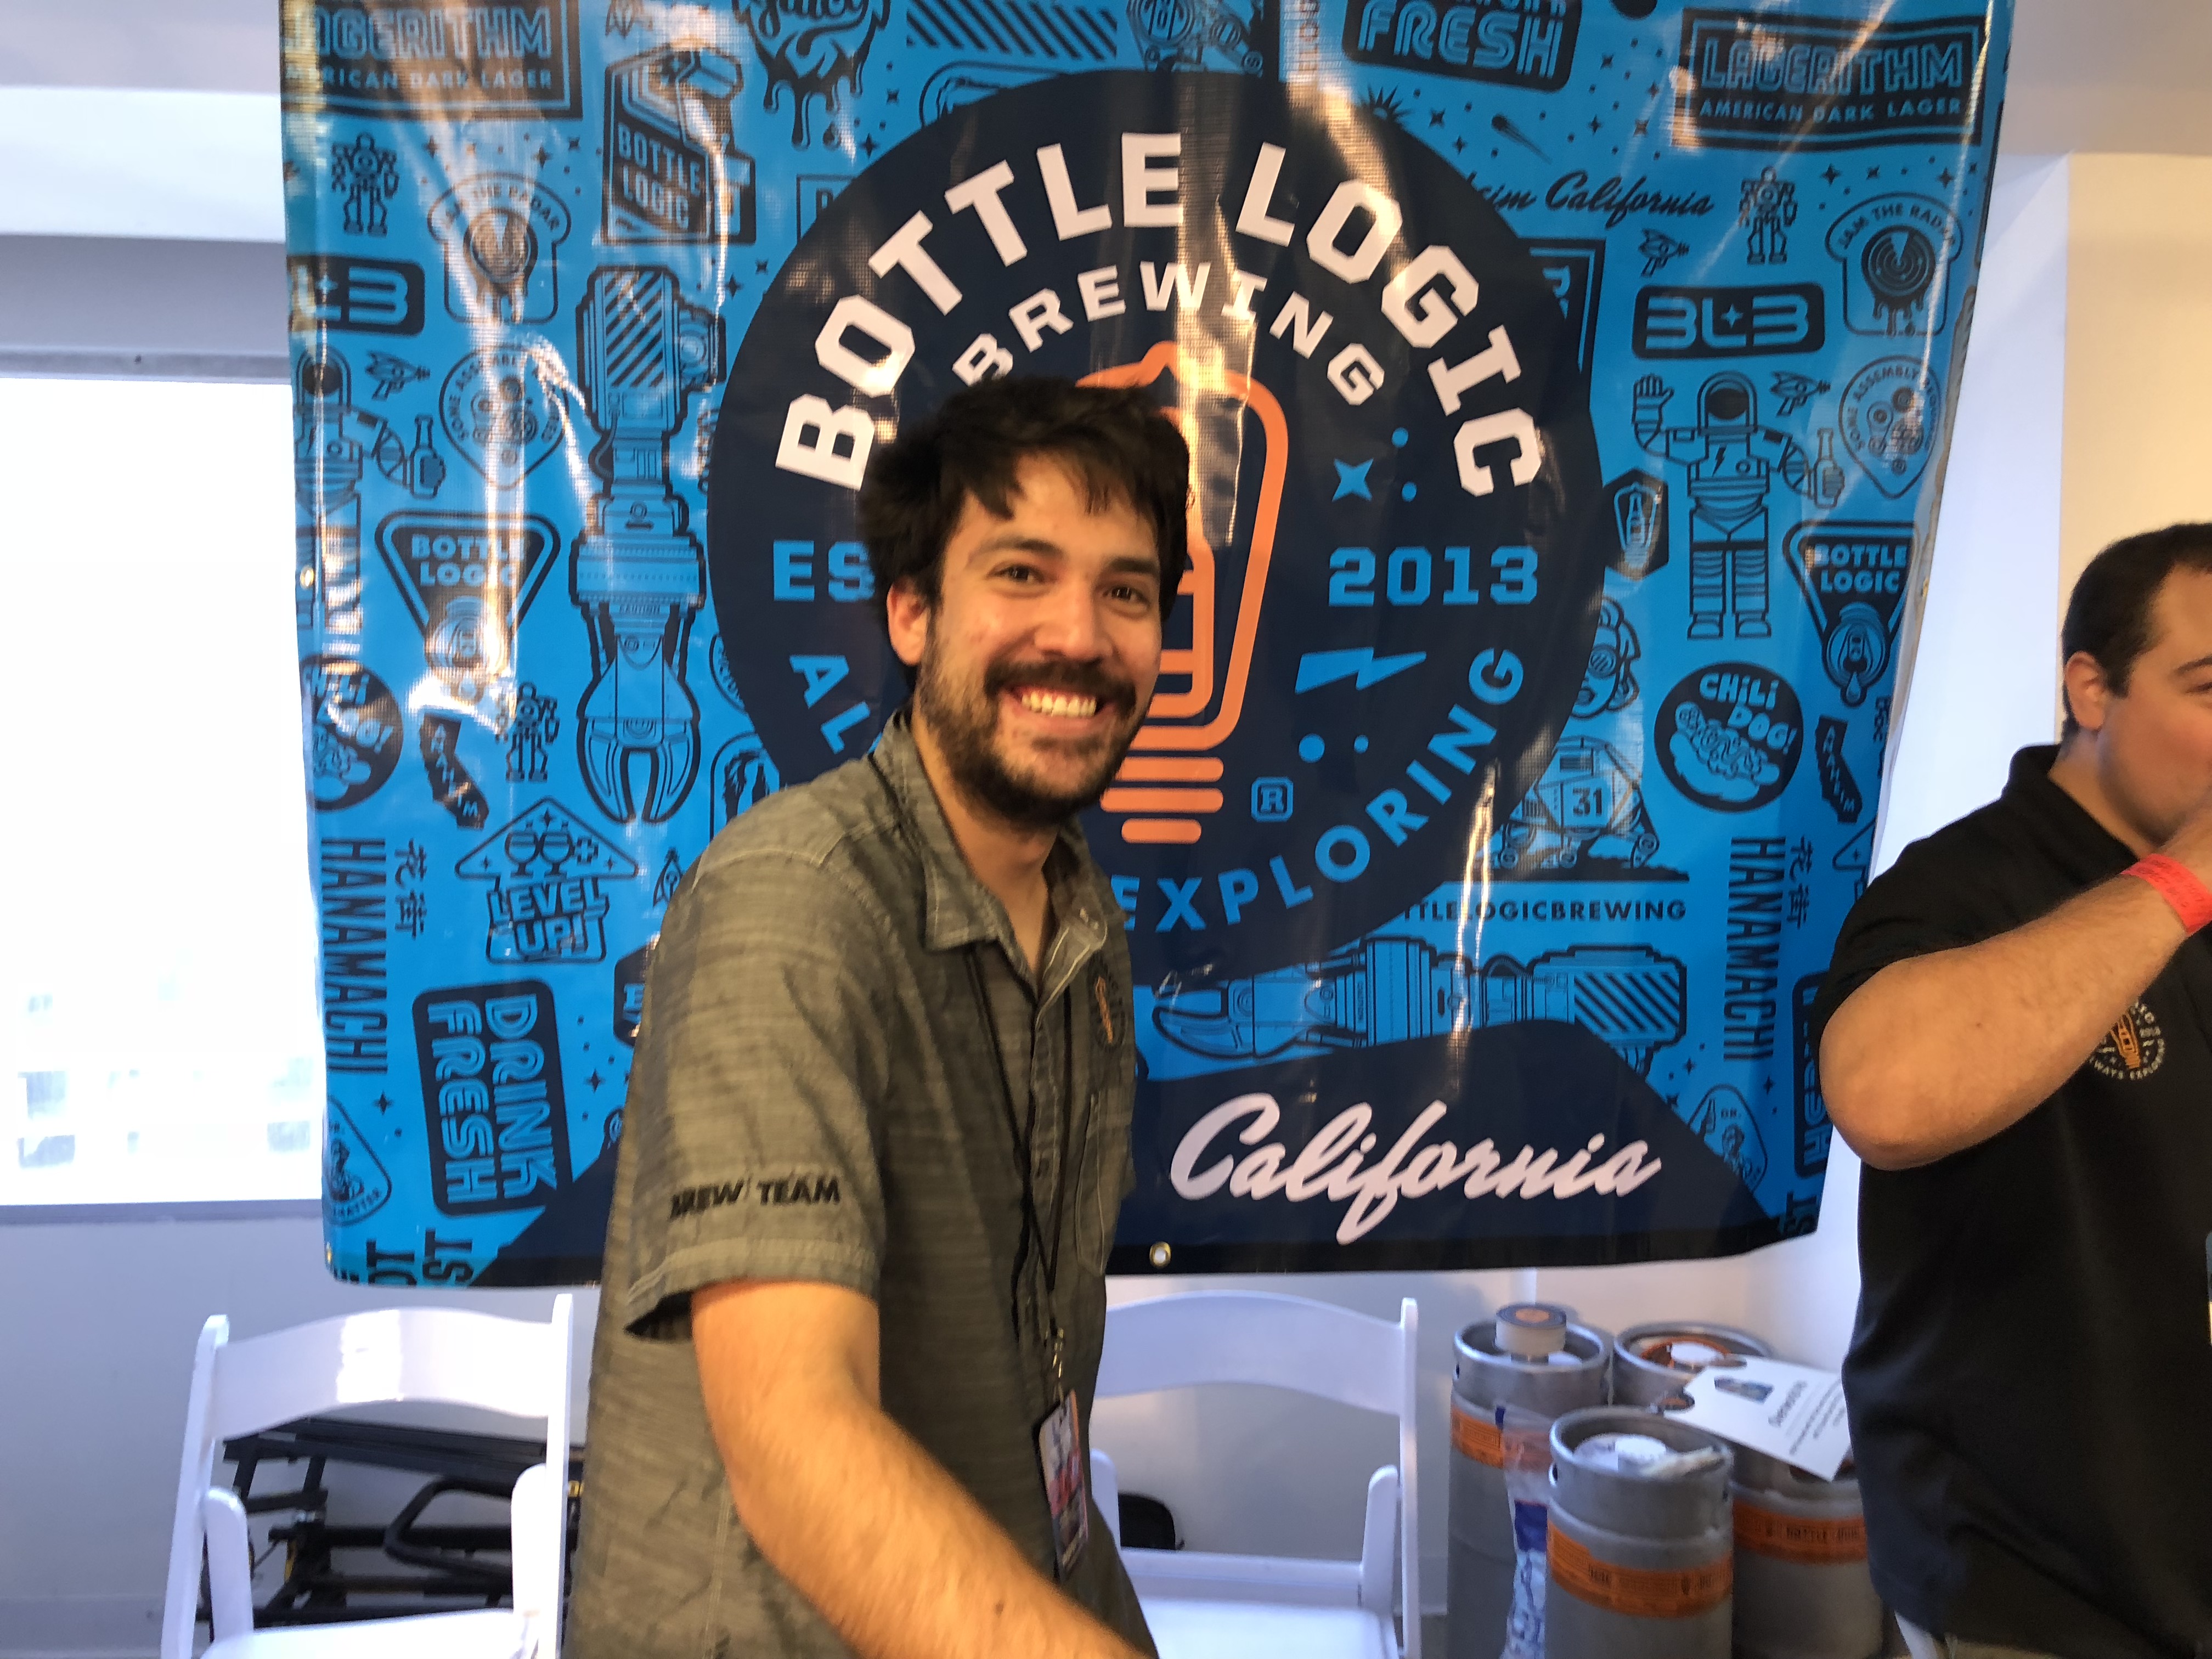 Enjoyed the offerings from Bottle Logic Brewing at BeerAdvocate Extreme Beer Fest in Los Angeles.